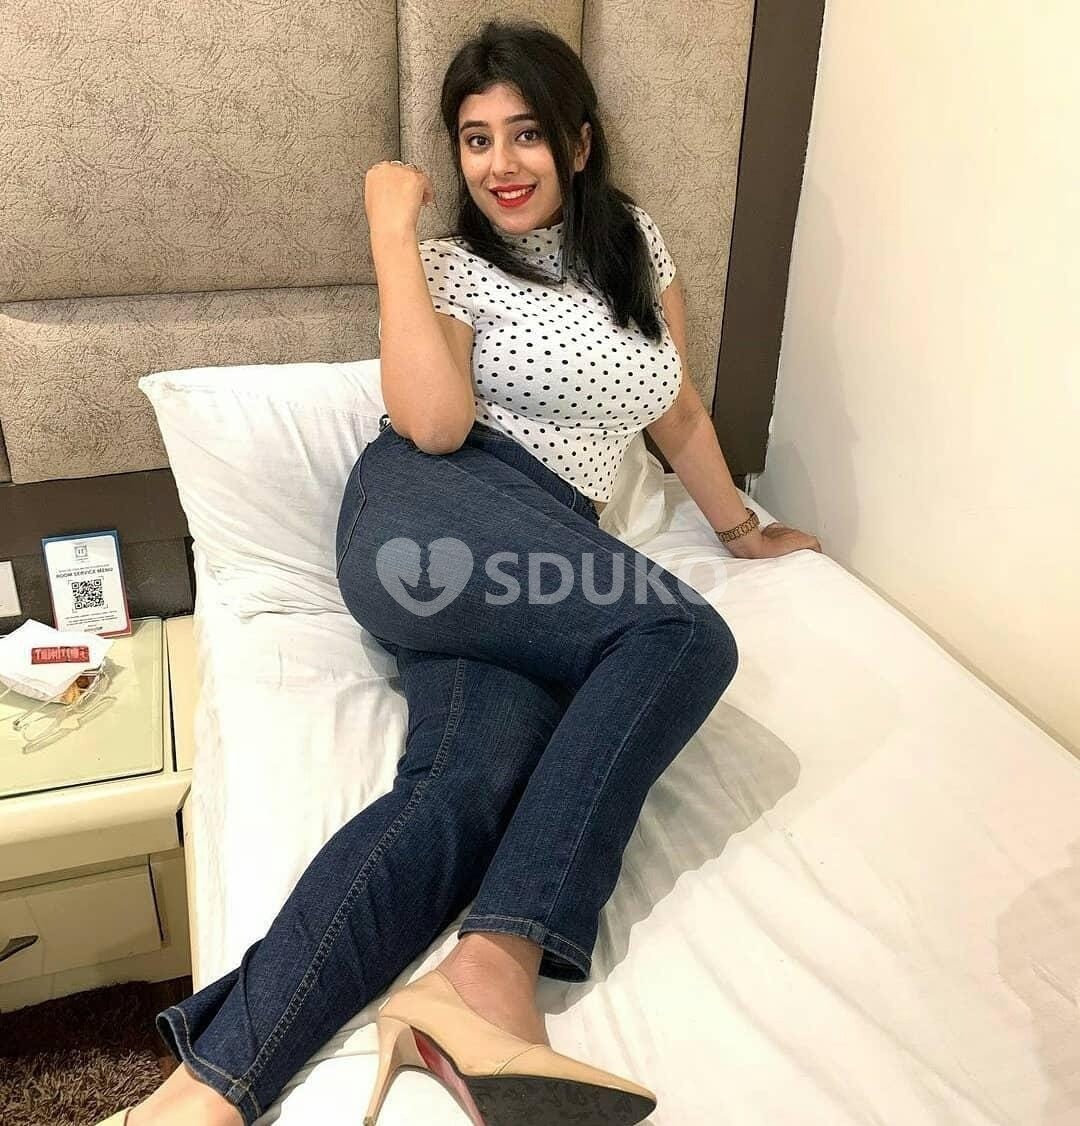 💥VAPI 💋TODAY 💸LOW 🥳PRICE 💯%GENIUNE 🥰SEXY VIP CALL GIRL'S 💃AVAILABLE BOOK NOW...